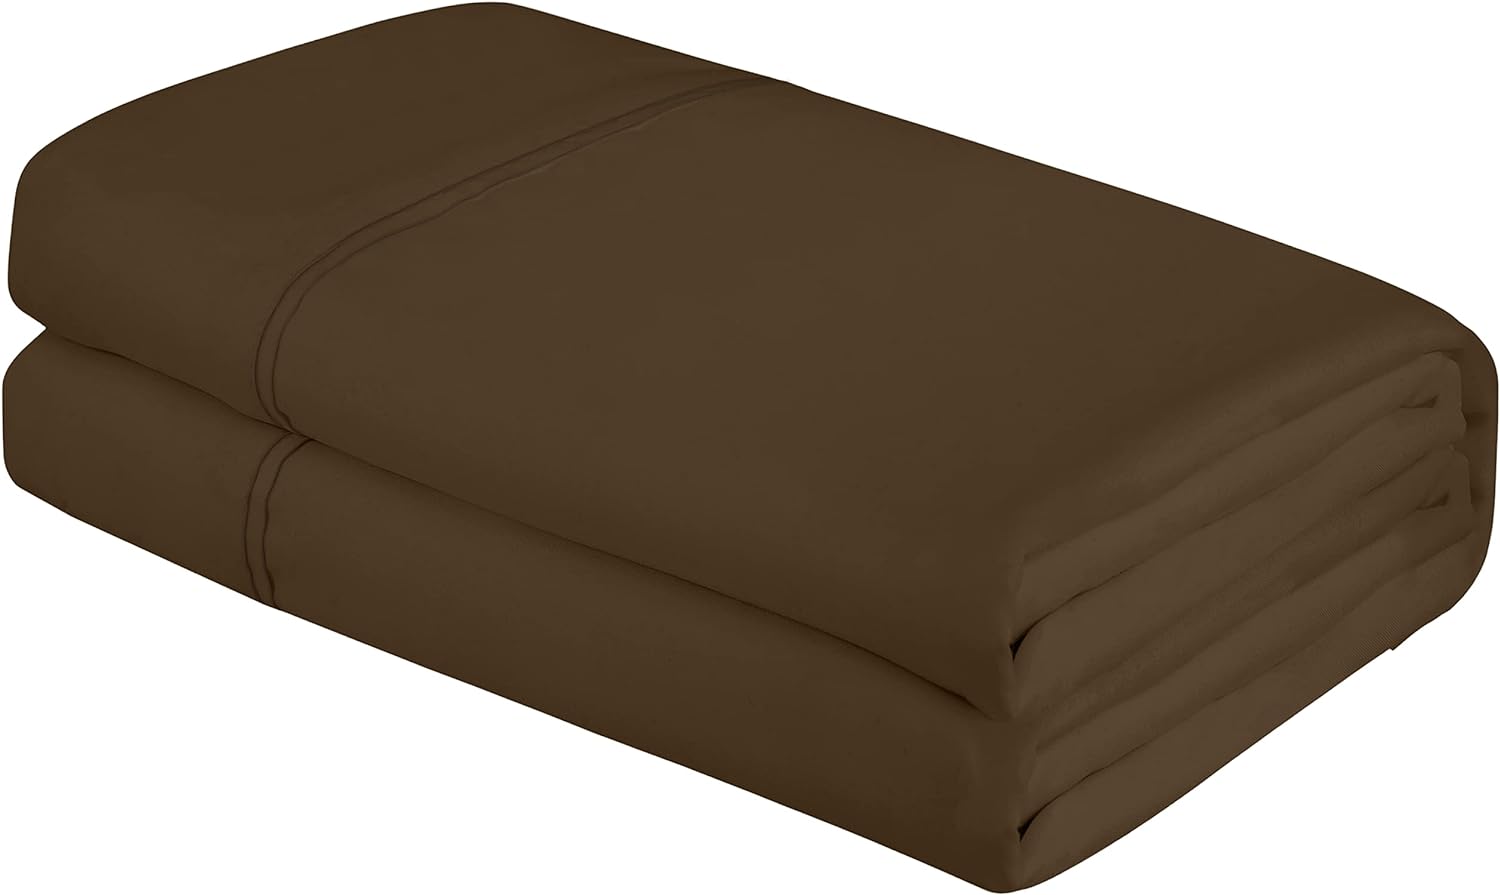 ROYALE LINENS Twin Size Flat Sheet Only - Brushed 1800 Microfiber - Ultra Soft & Breathable - Wrinkle & Stain Resistant - Hotel Quality Flat Sheet Sold Separately - Top Sheet For Bed (Twin, Chocolate)